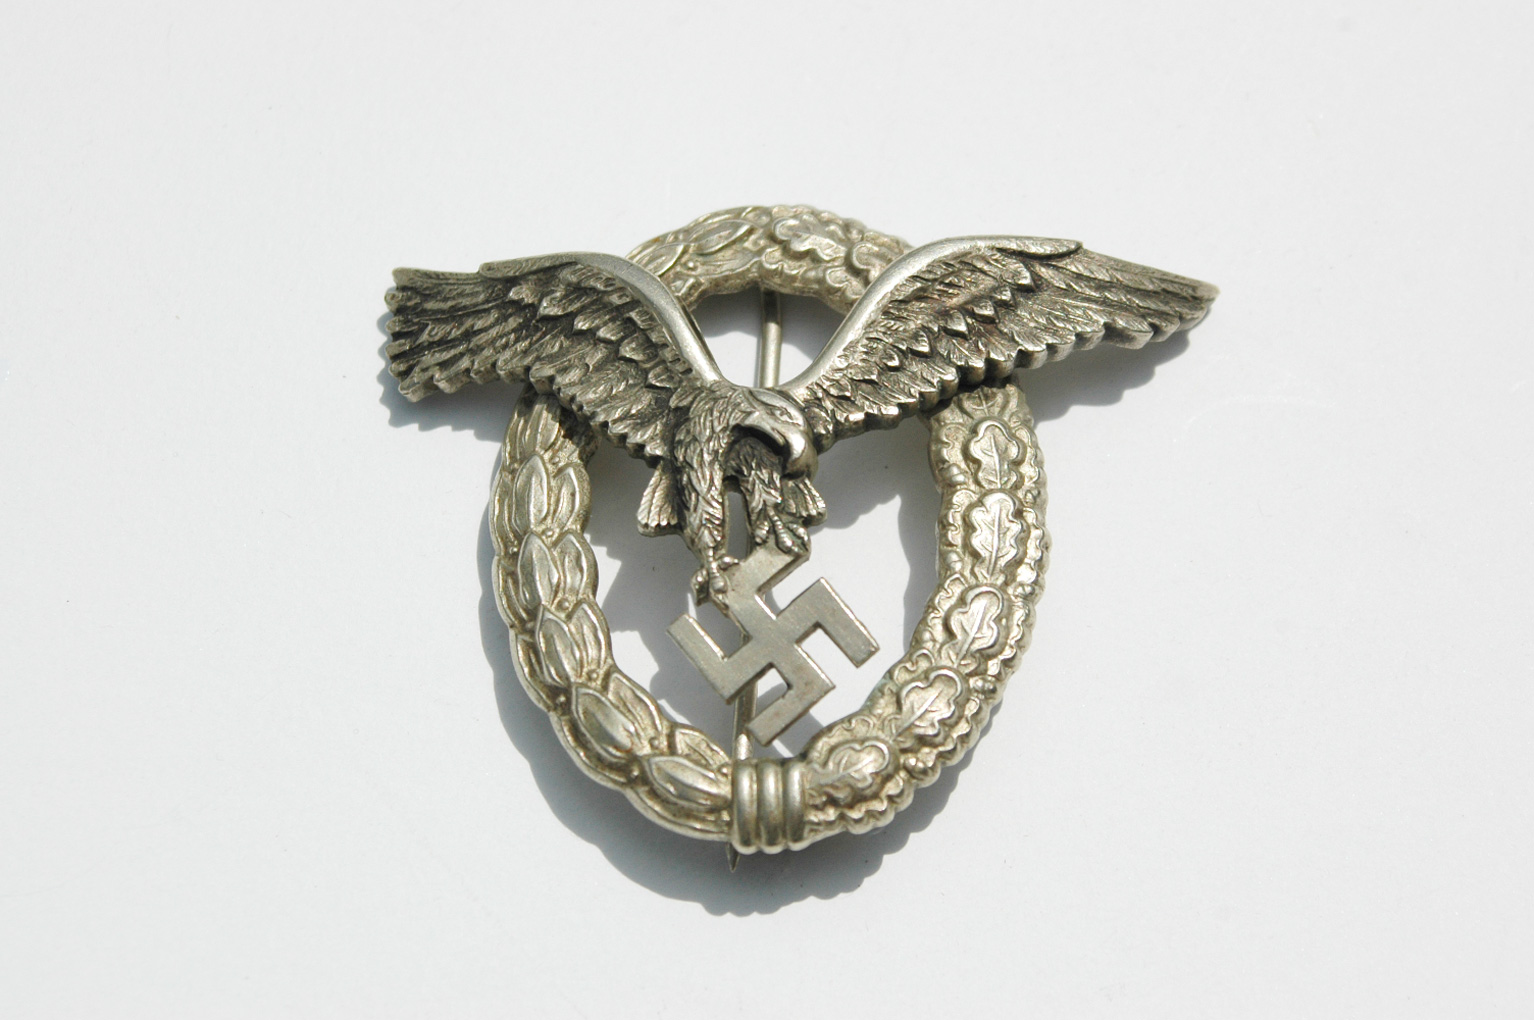 Reproduction German WWII Luftwaffe Pilots Badge